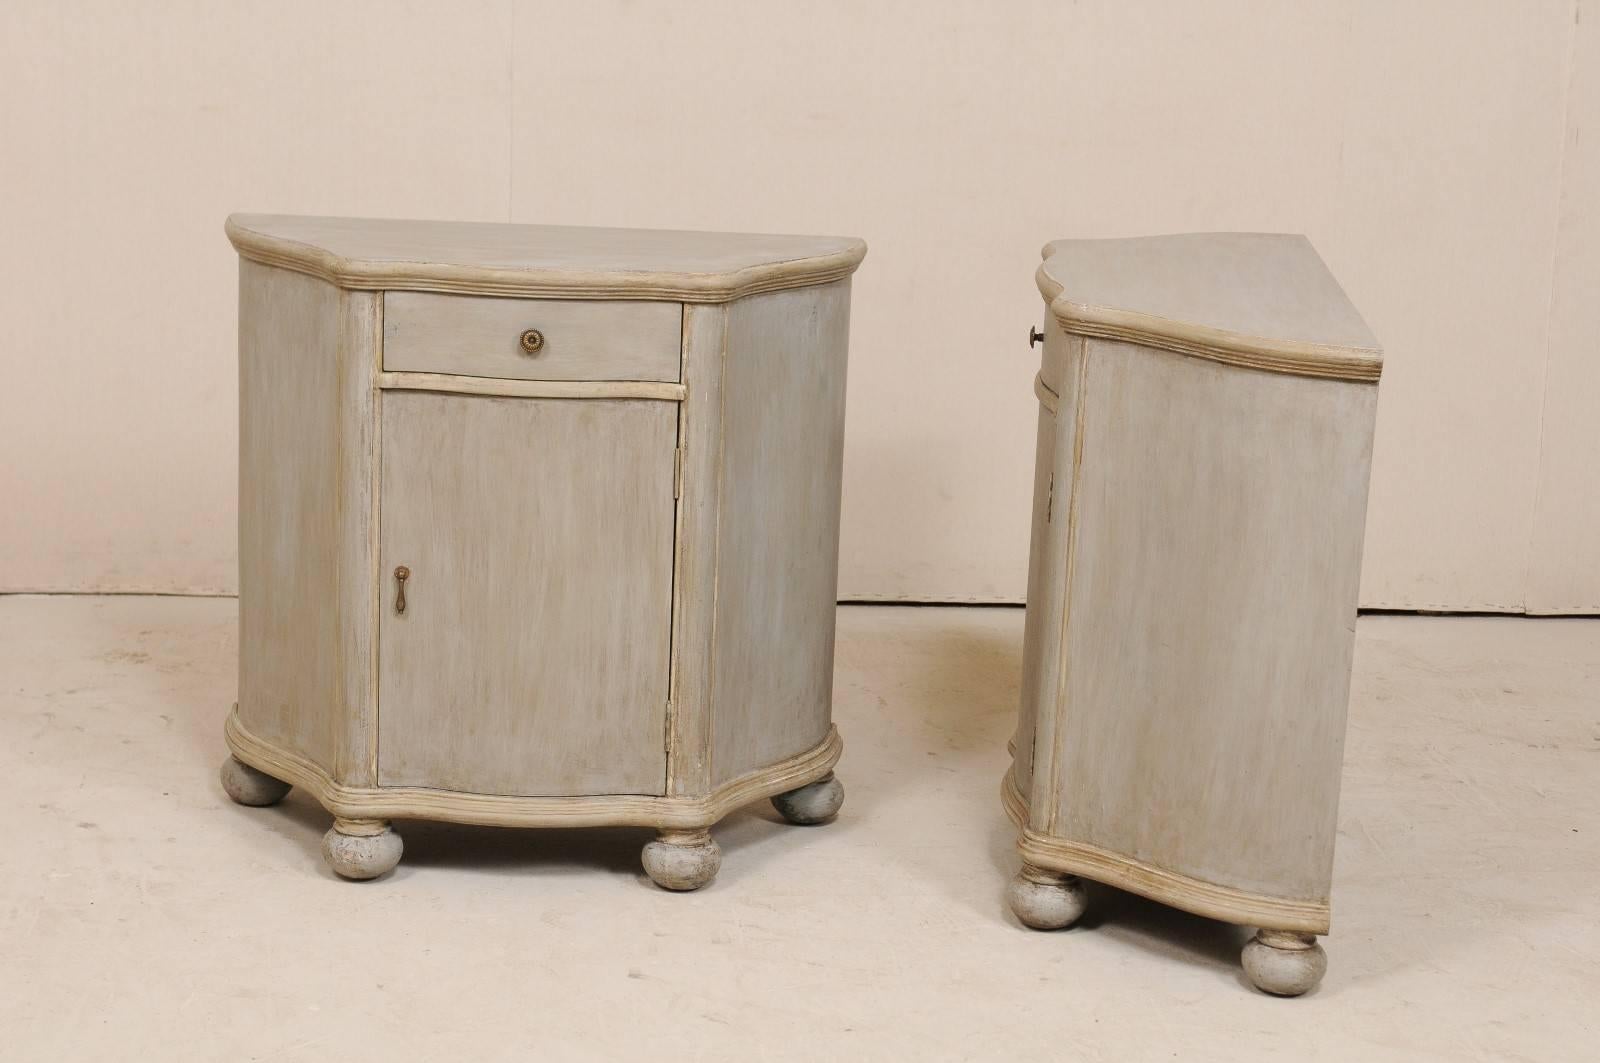 20th Century Pair of Vintage Painted Wood Demi-Styled Cabinets on Rounded Bun Feet